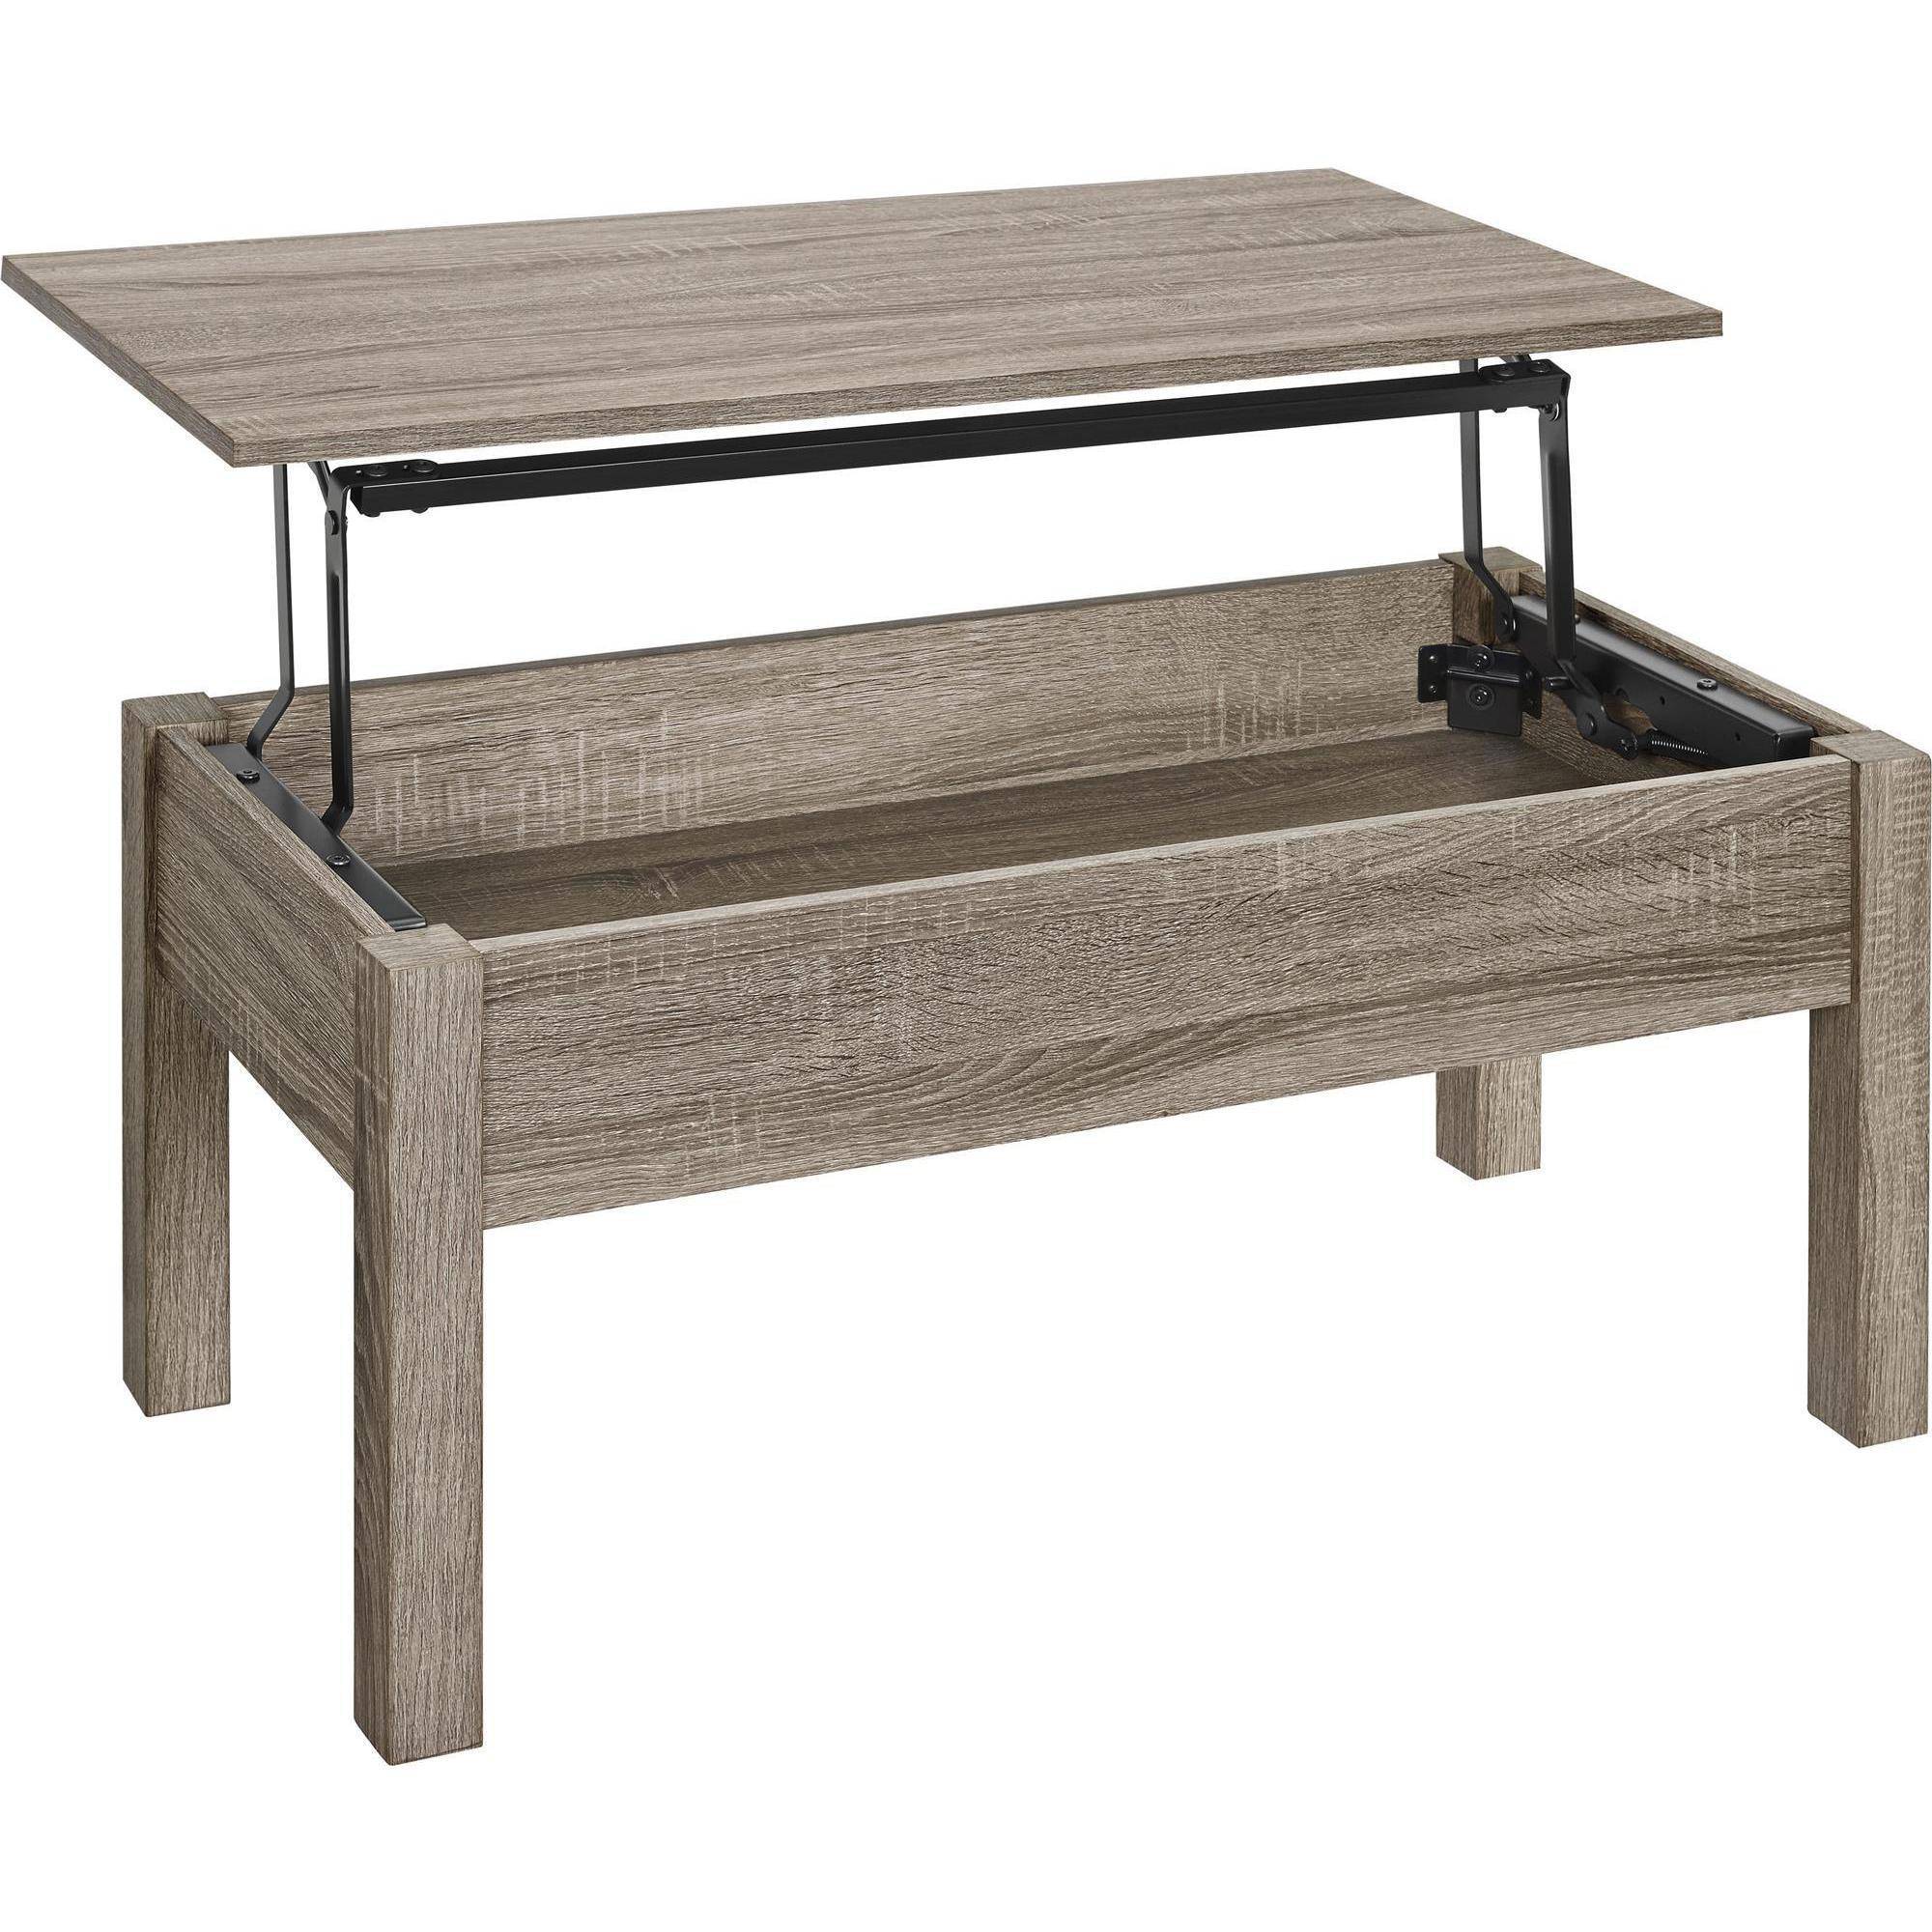 lift top coffee table mainstays lift-top coffee table, multiple colors - walmart.com MHLTKMN